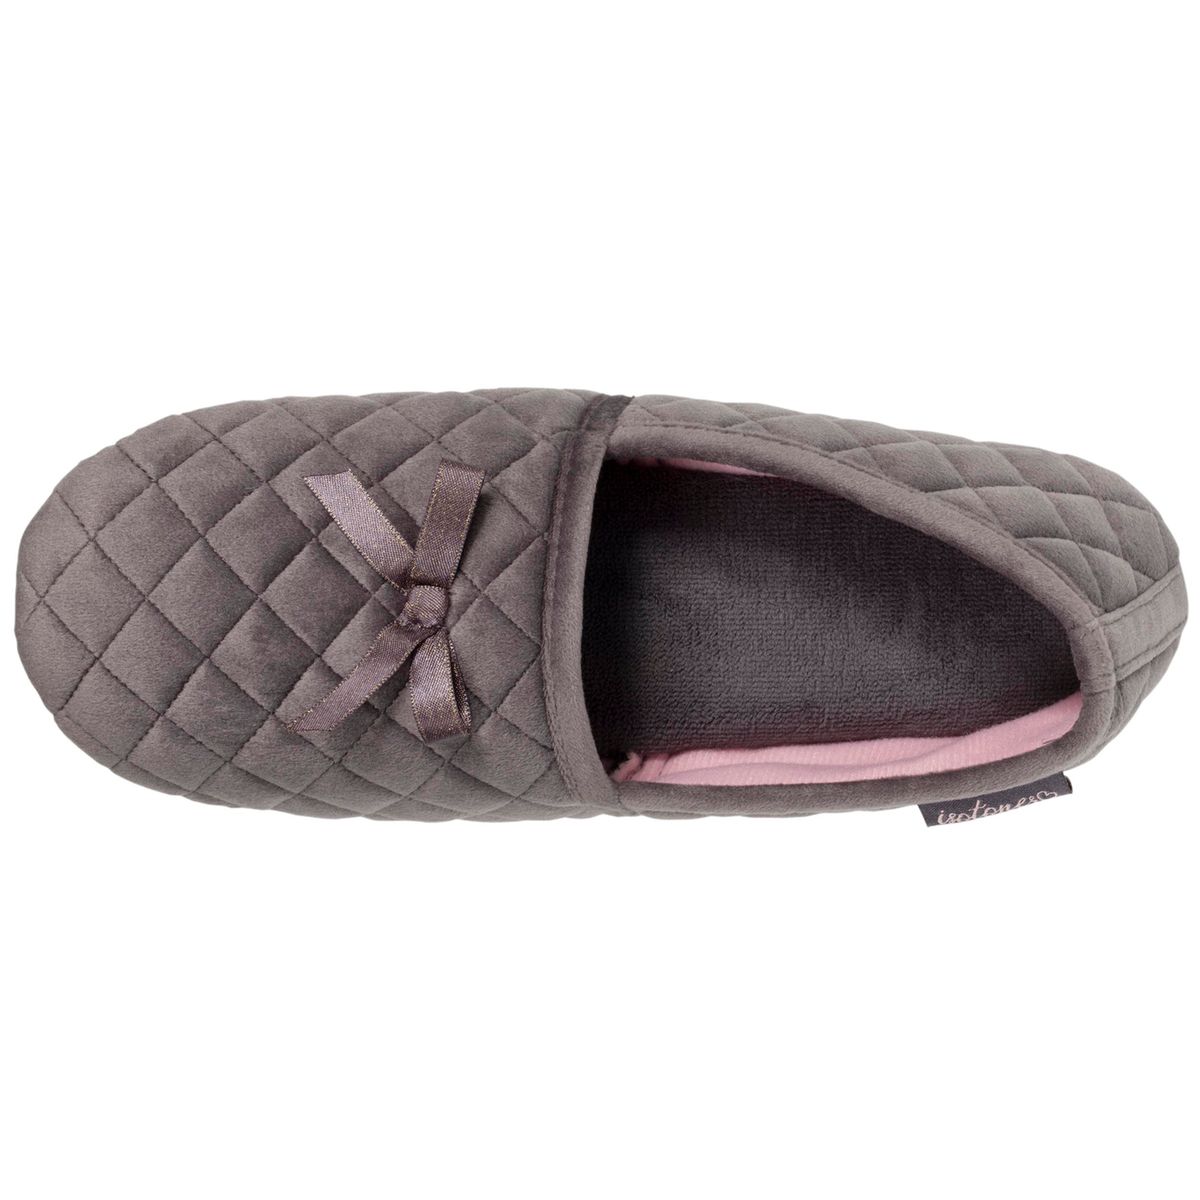 Isotoner Chaussons extra-light Slippers Gris - Chaussures